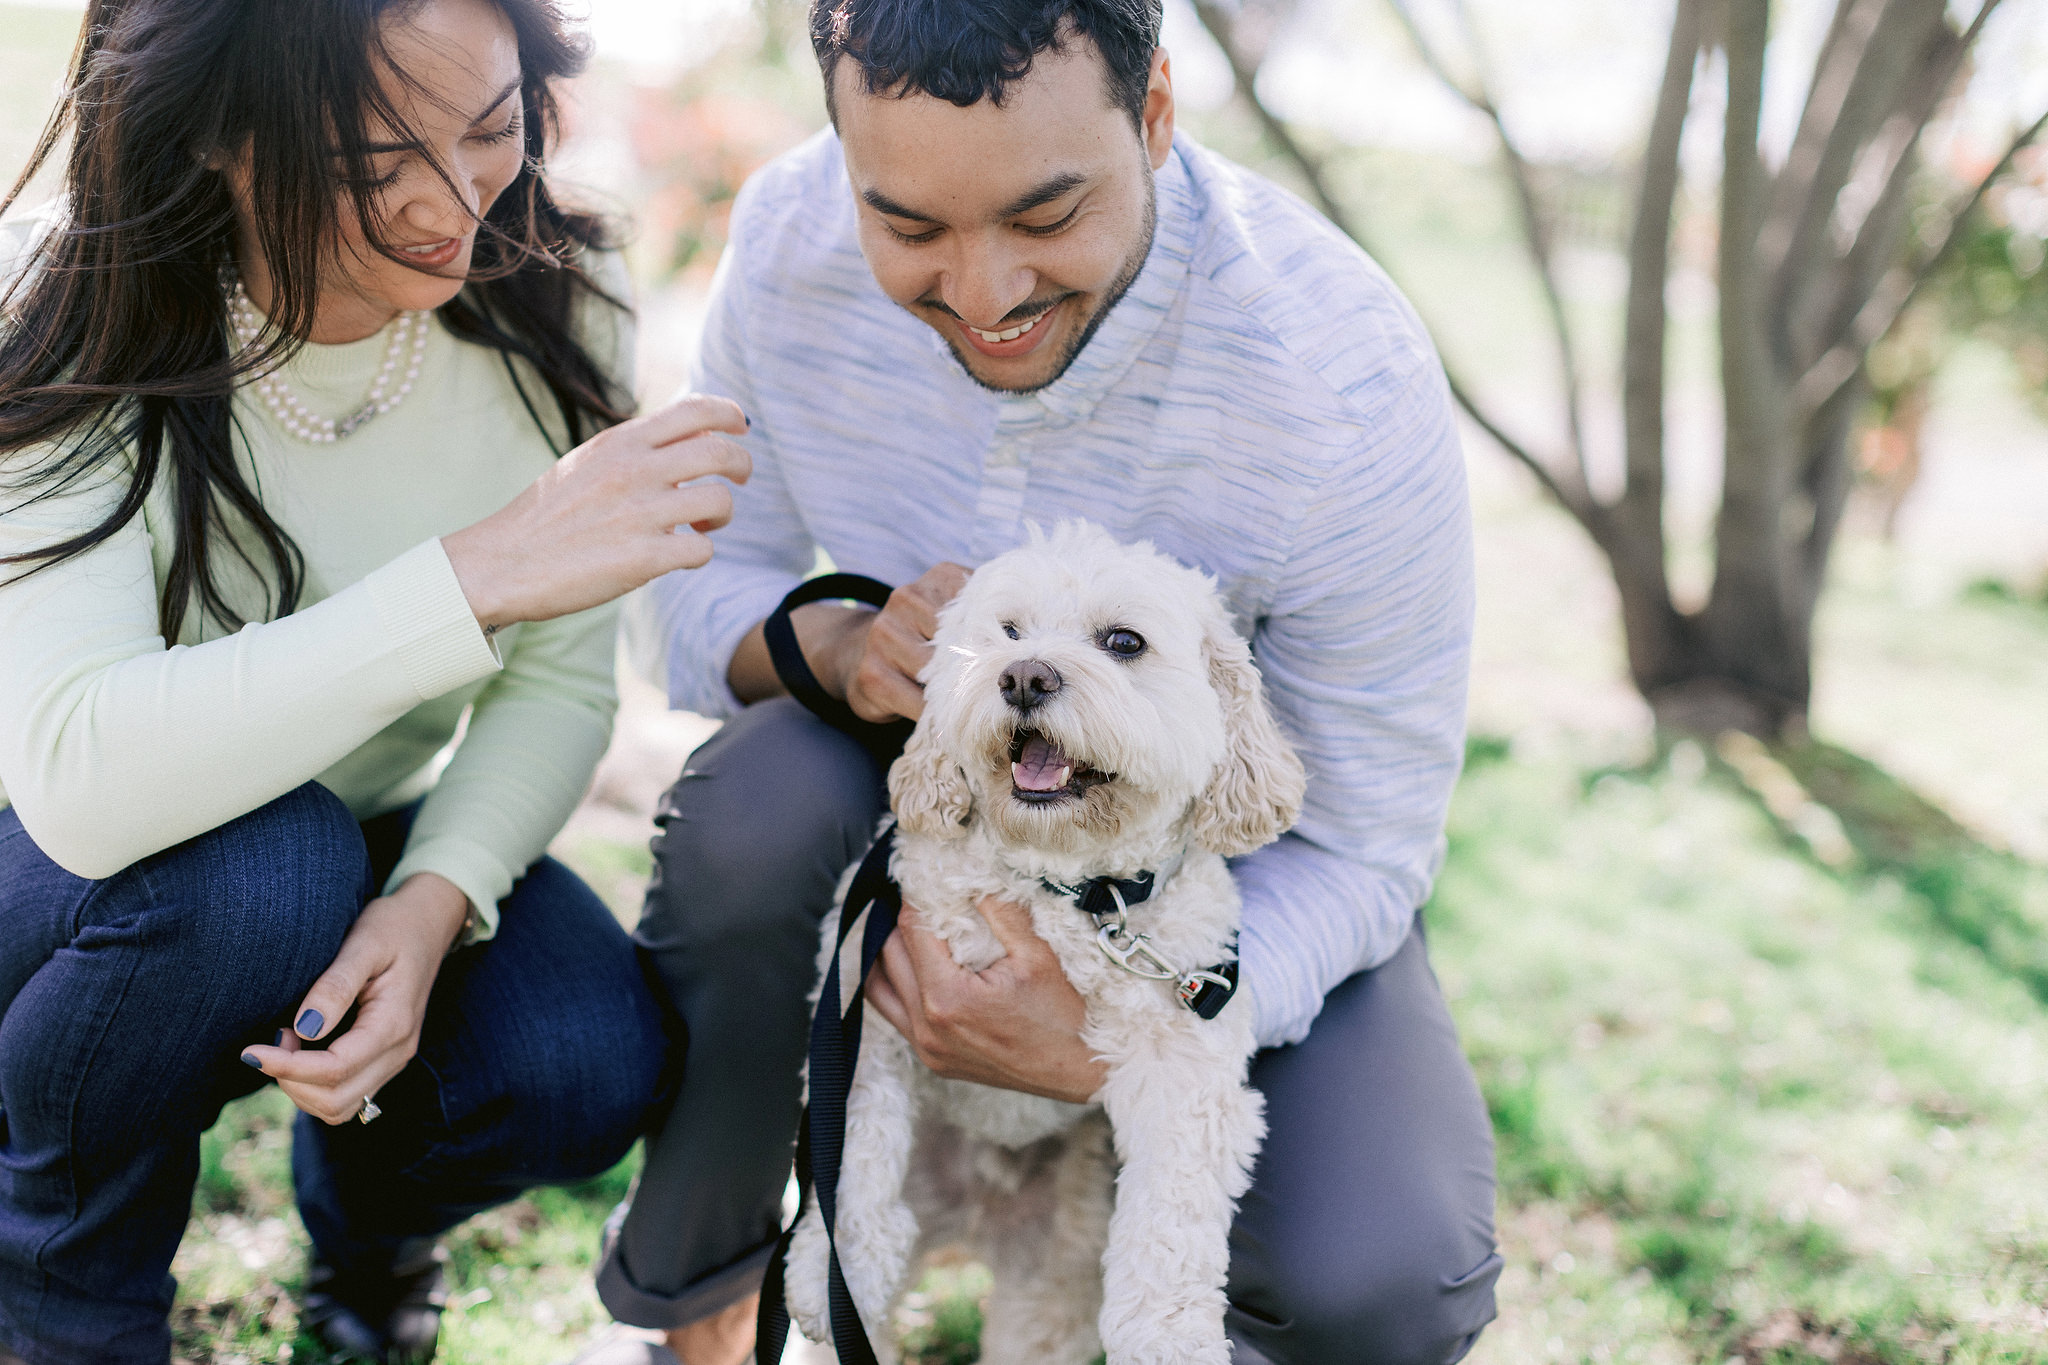 The engaged couple is cuddling their pet. Engagement session with pets photo by Jenny Fu Studio.